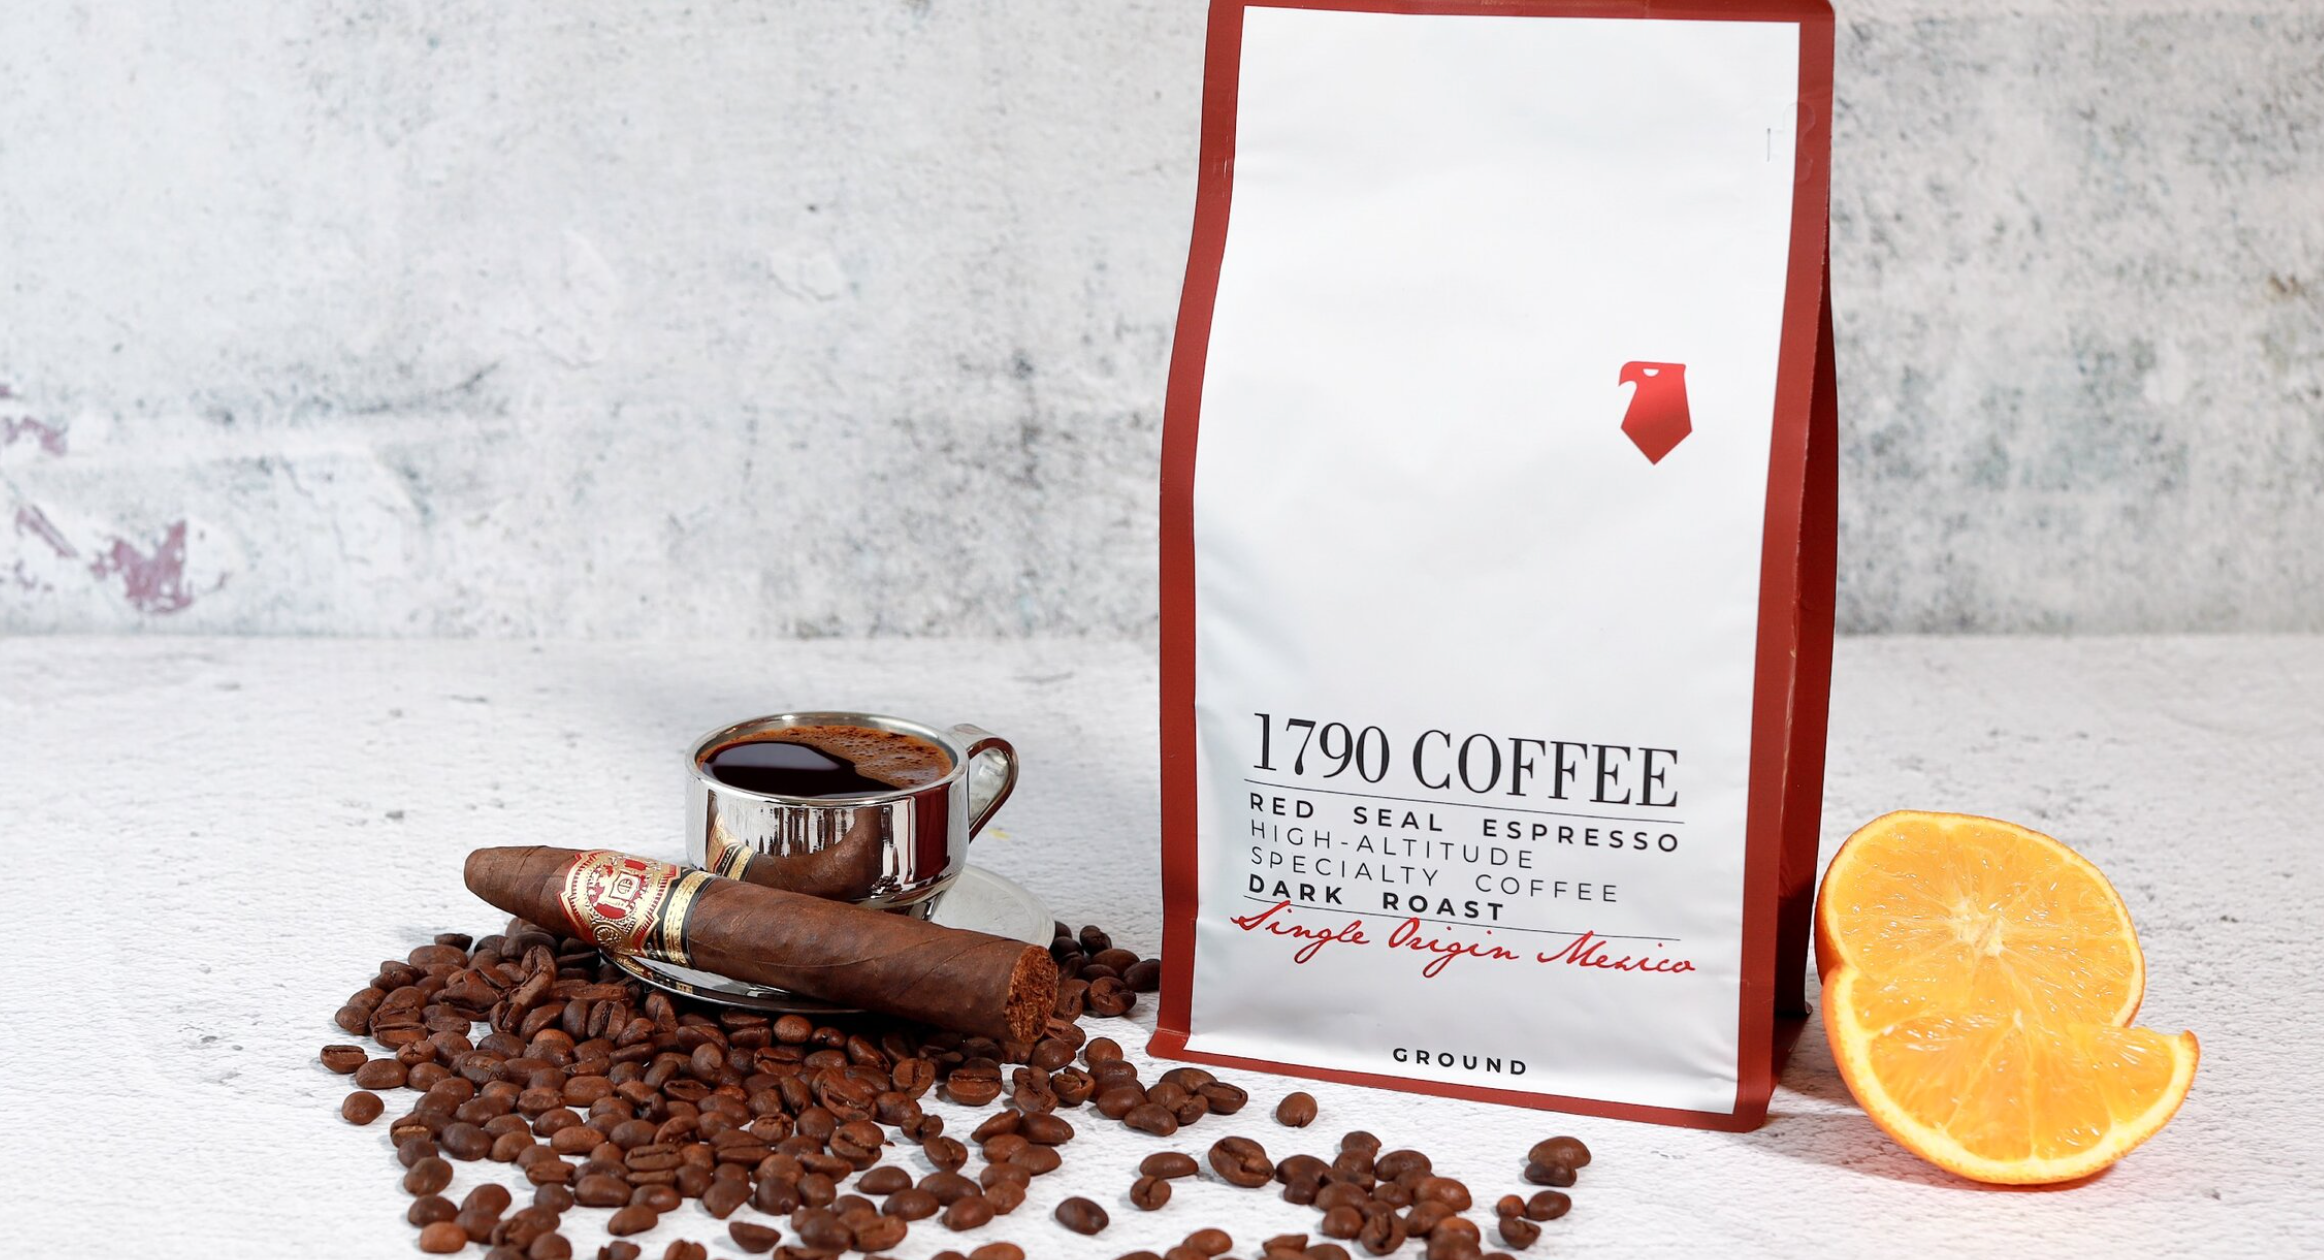 Product Launch: 1790 Coffee Introduces its Ground Coffee